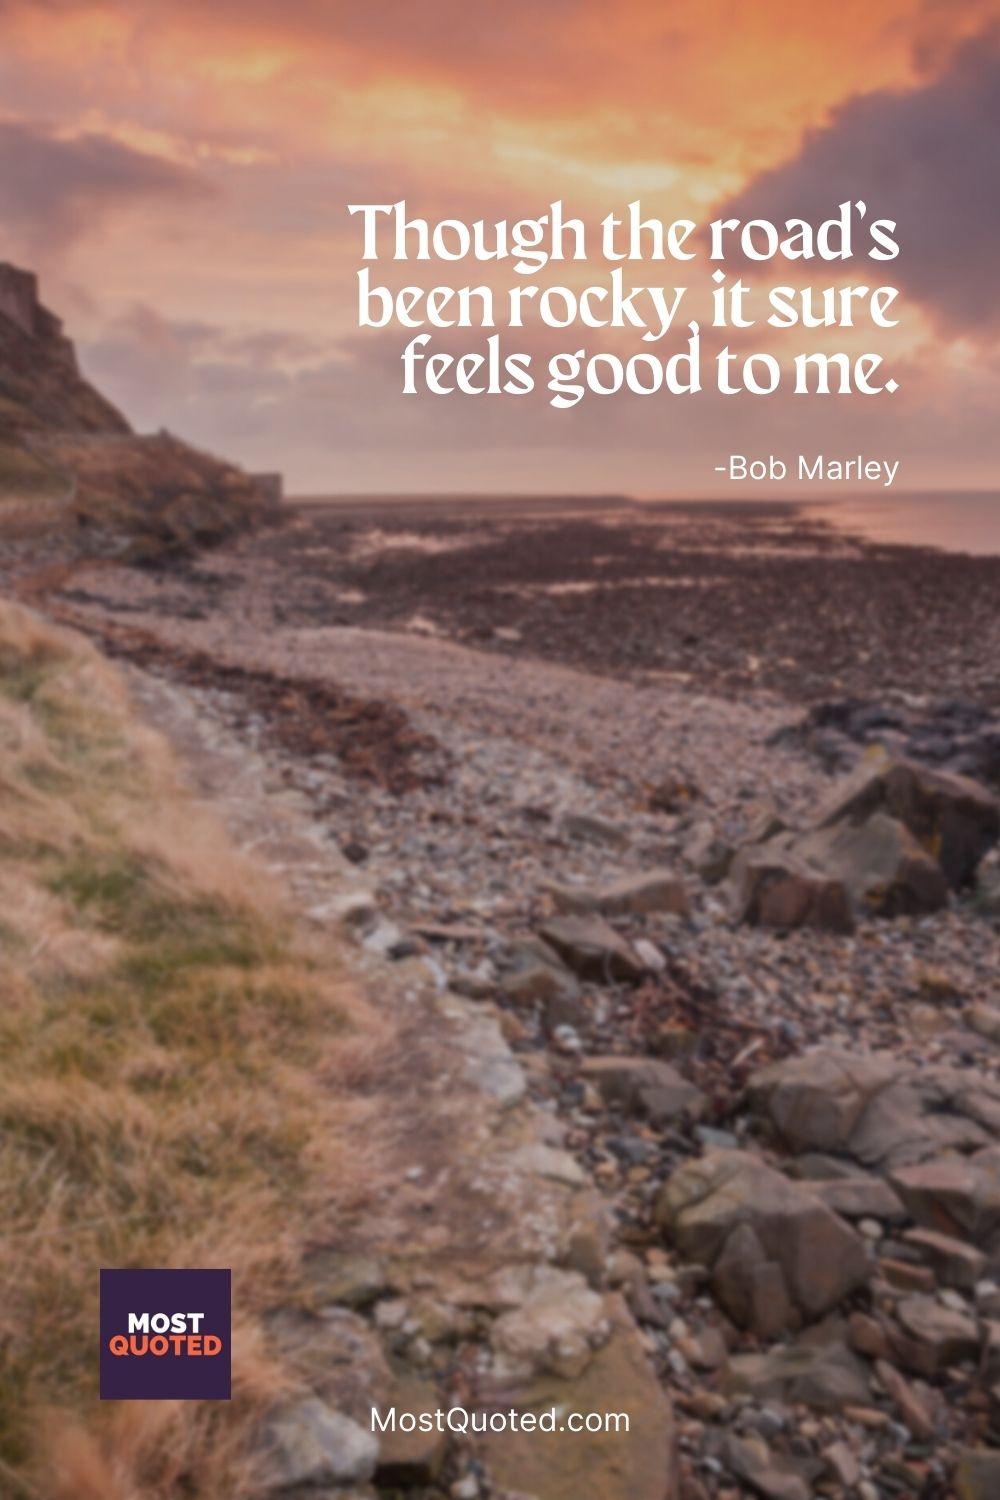 Though the road’s been rocky, it sure feels good to me. - Bob Marley